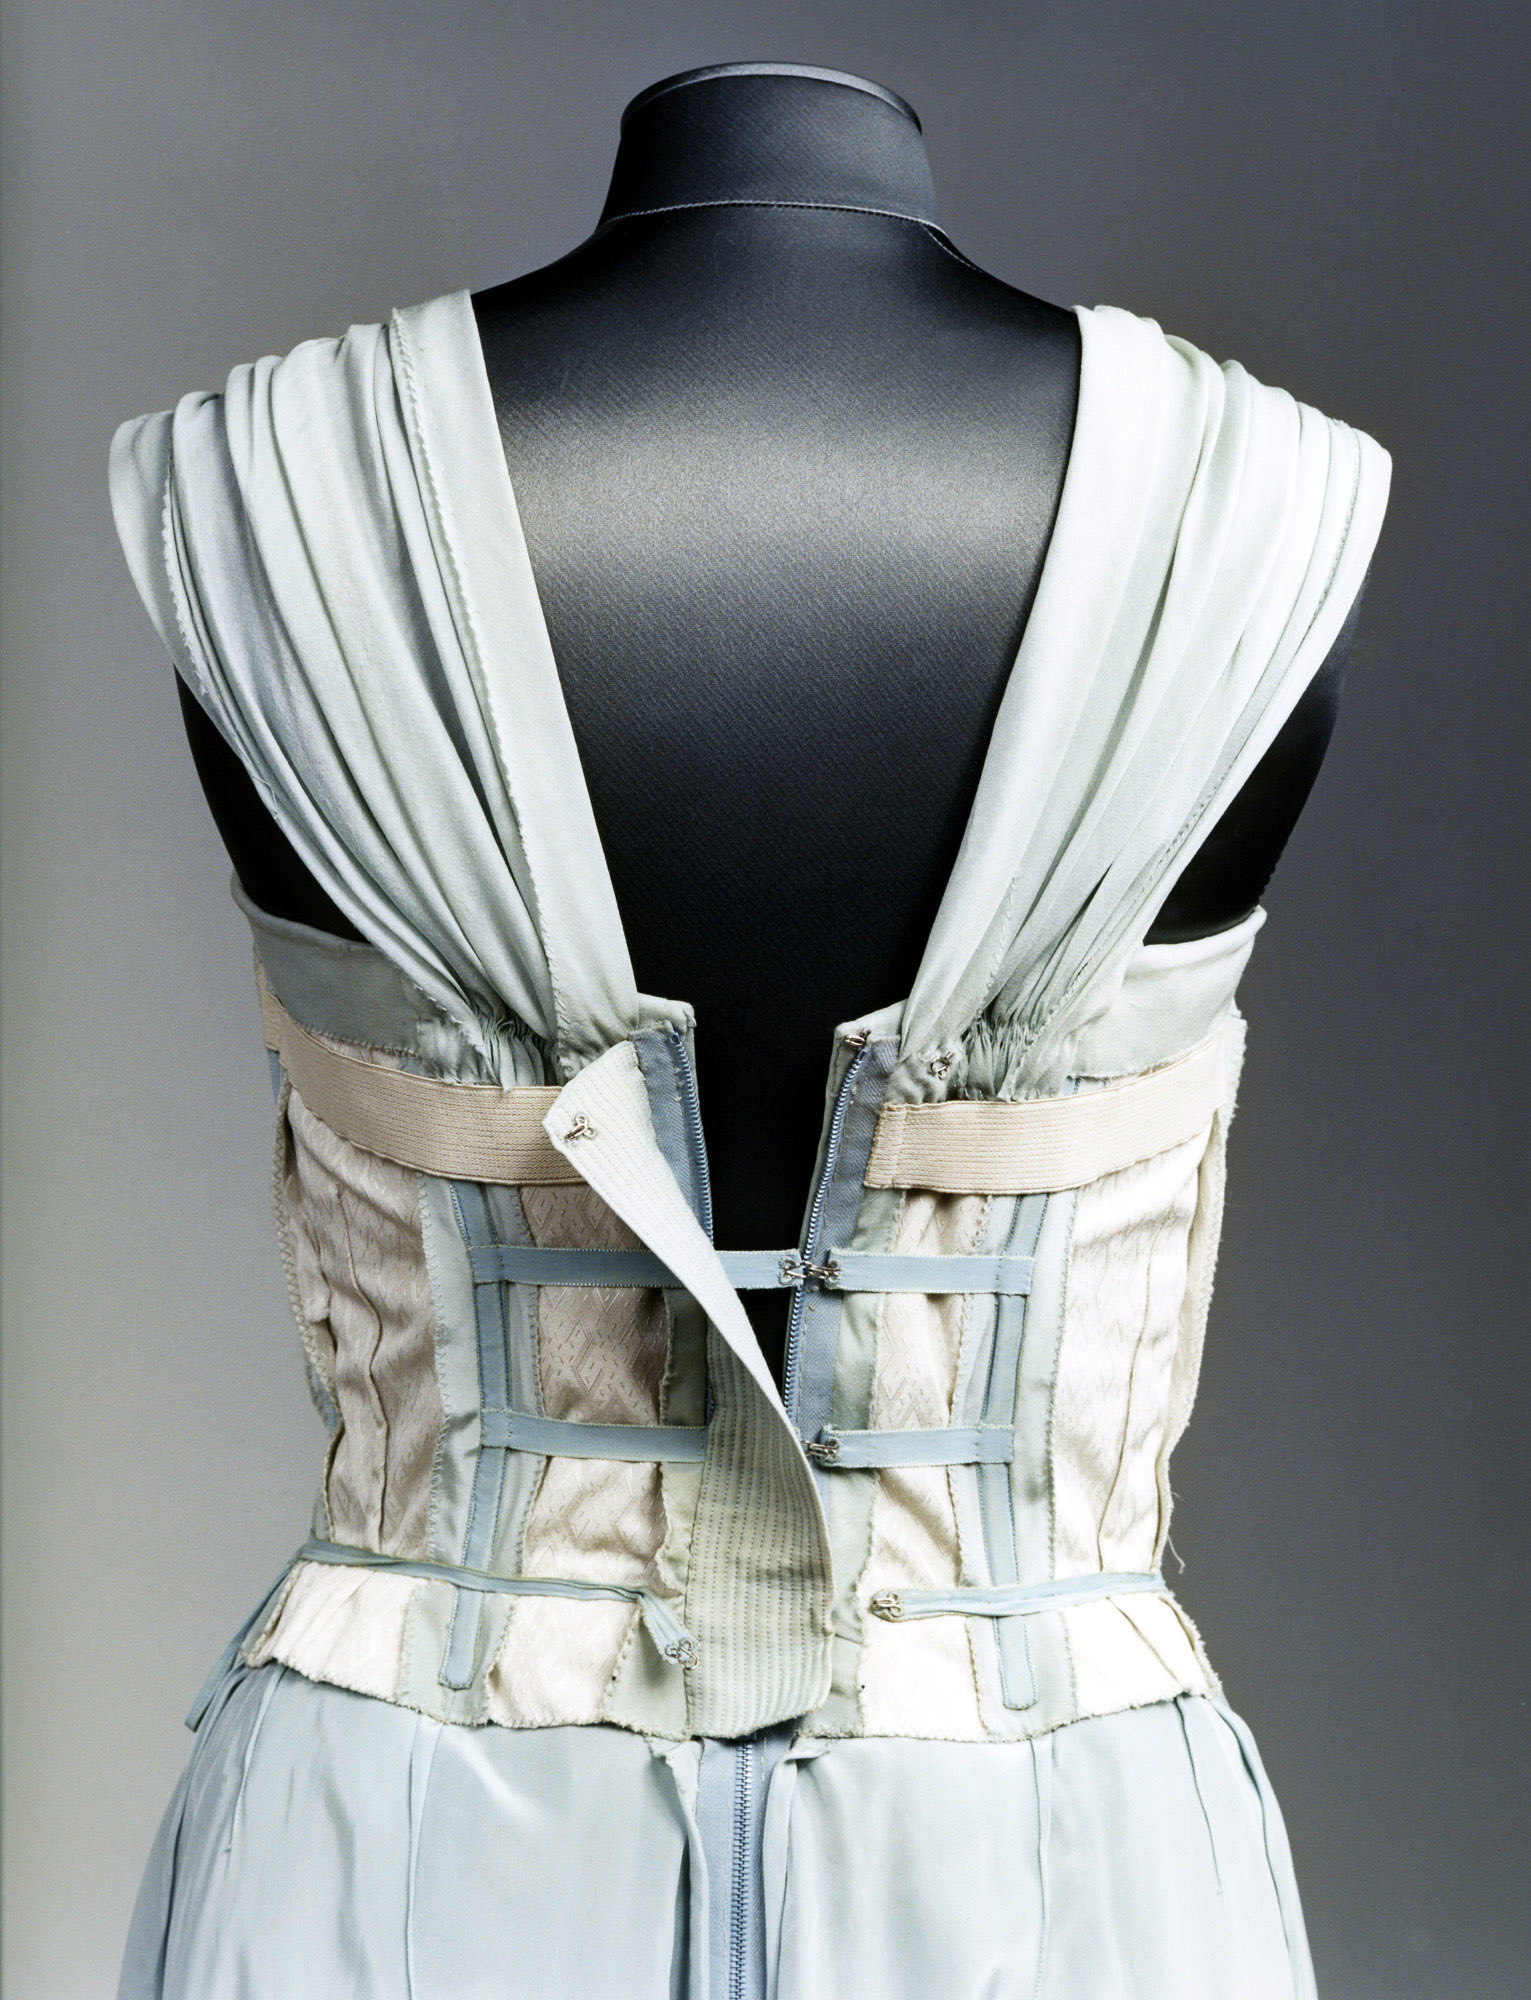 GERTRUD HÖCHSMANN, COSTUME AND FASHION COLLECTION, UNIVERSITY OF APPLIED ARTS VIENNA